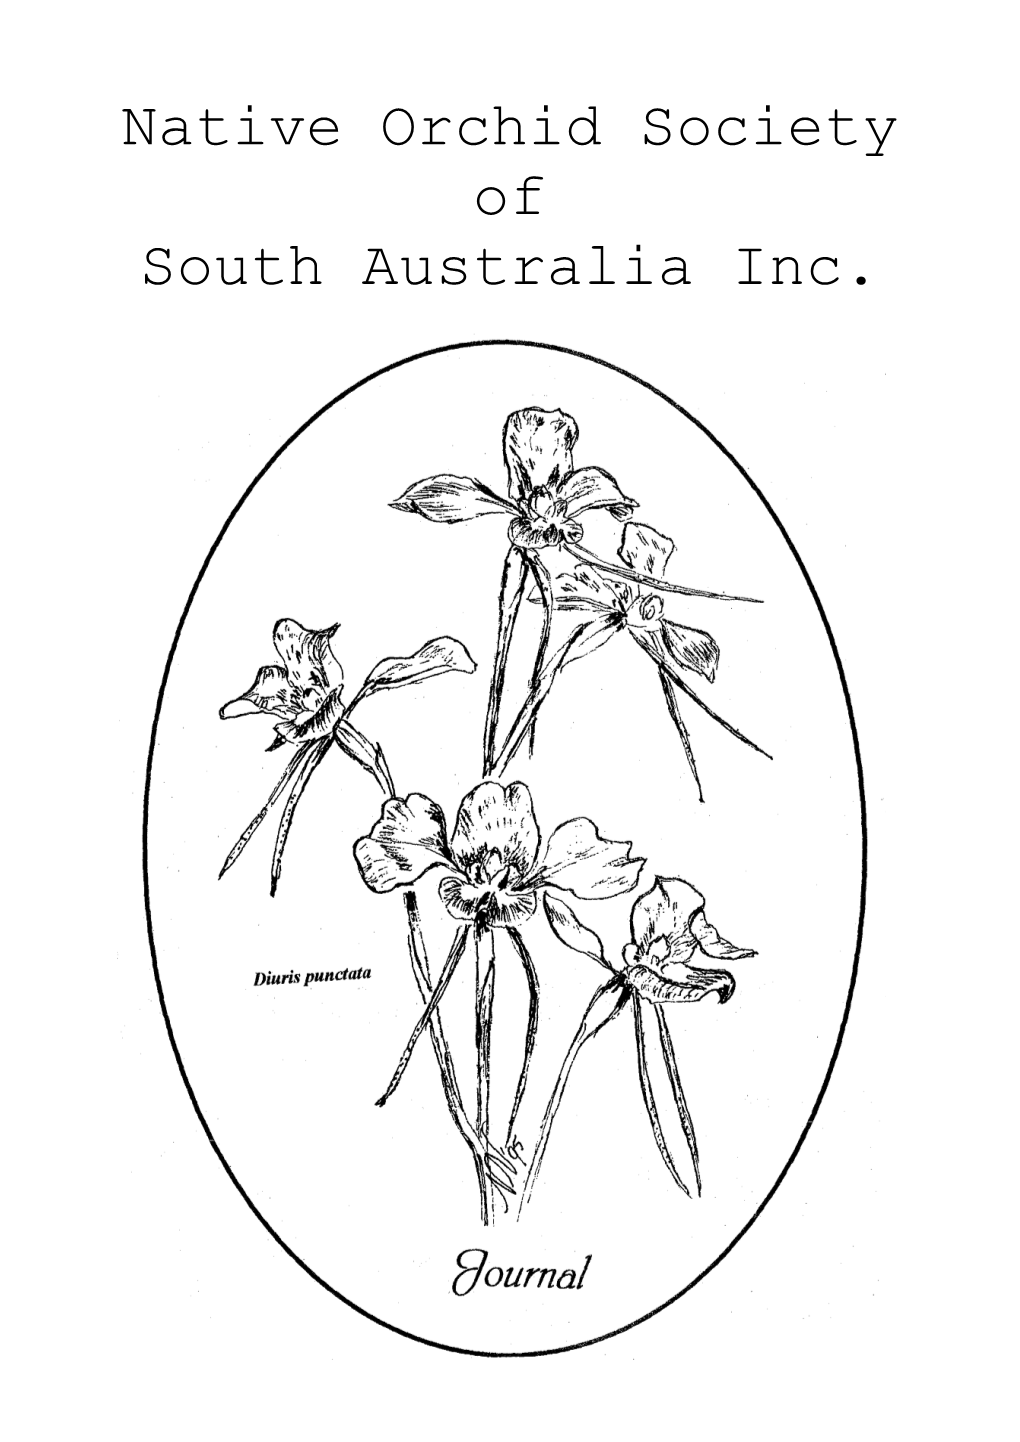 Native Orchid Society of South Australia Inc